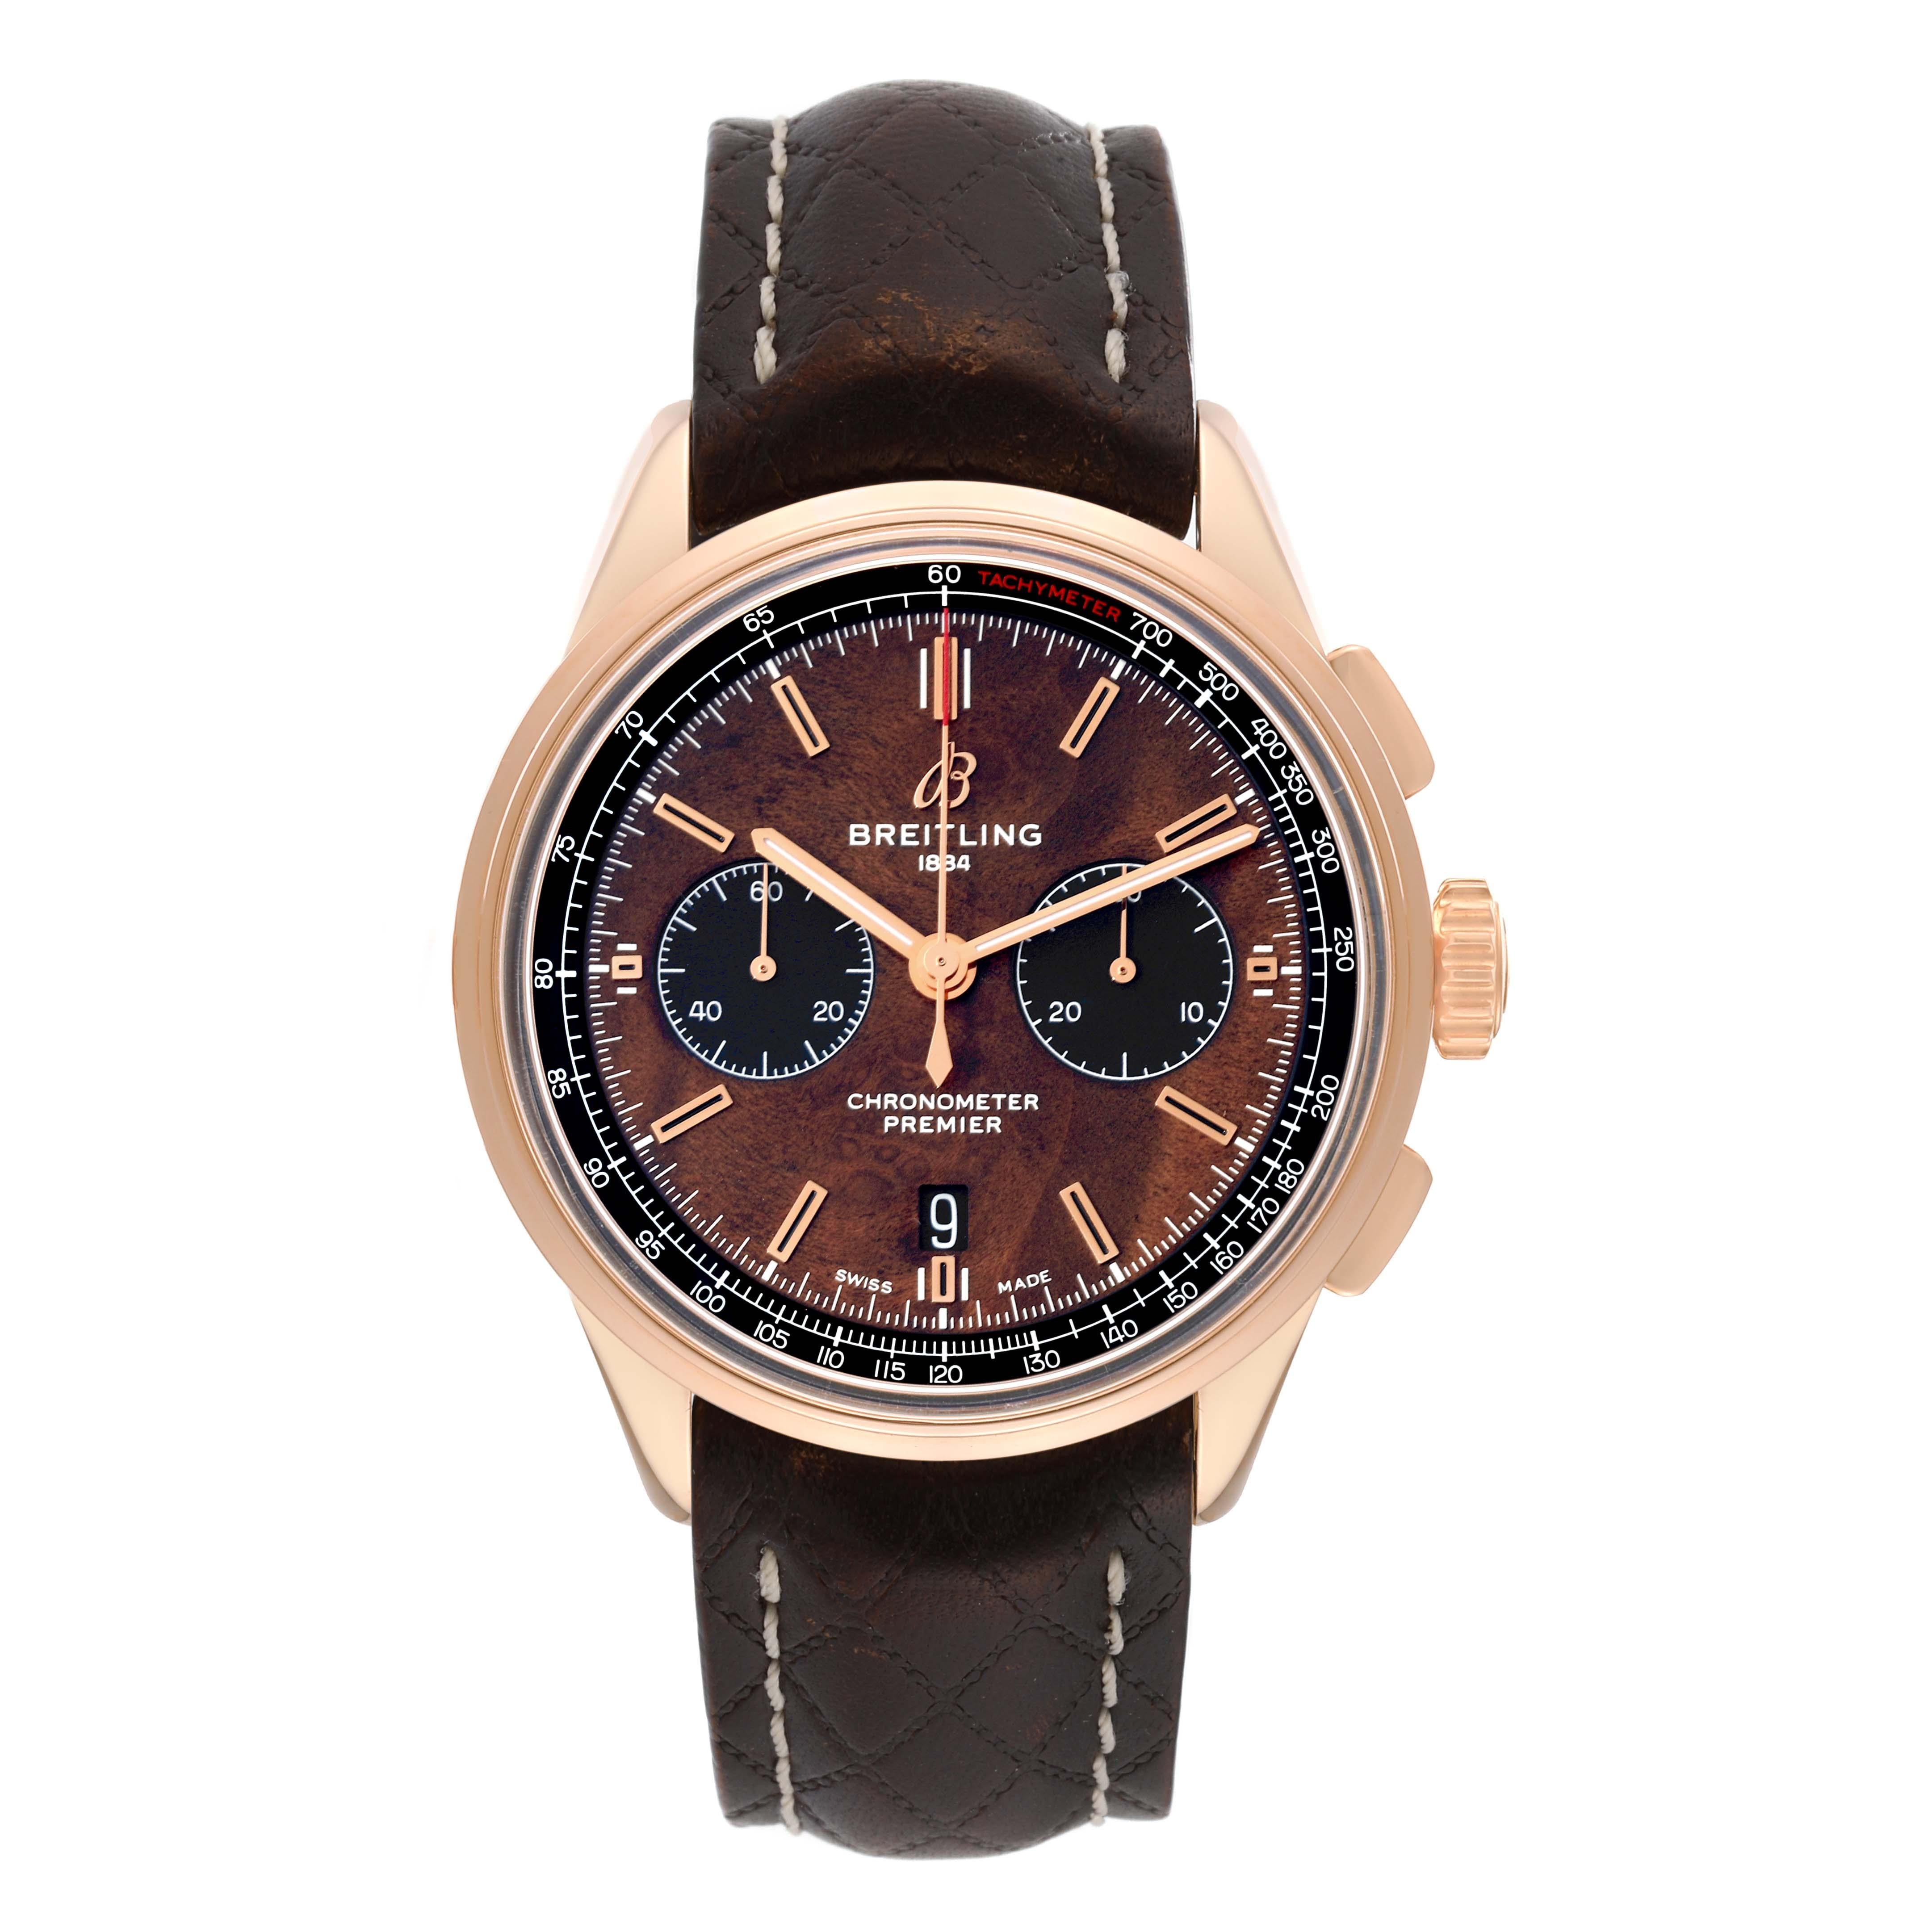 Breitling Premier B01 Bentley Centenary Limited Edition Rose Gold Mens Watch RB0118 Box Card. Automatic self-winding movement. 18k rose gold round case 42.0 mm in diameter. Transparent exhibition sapphire crystal case back. 18k rose gold smooth